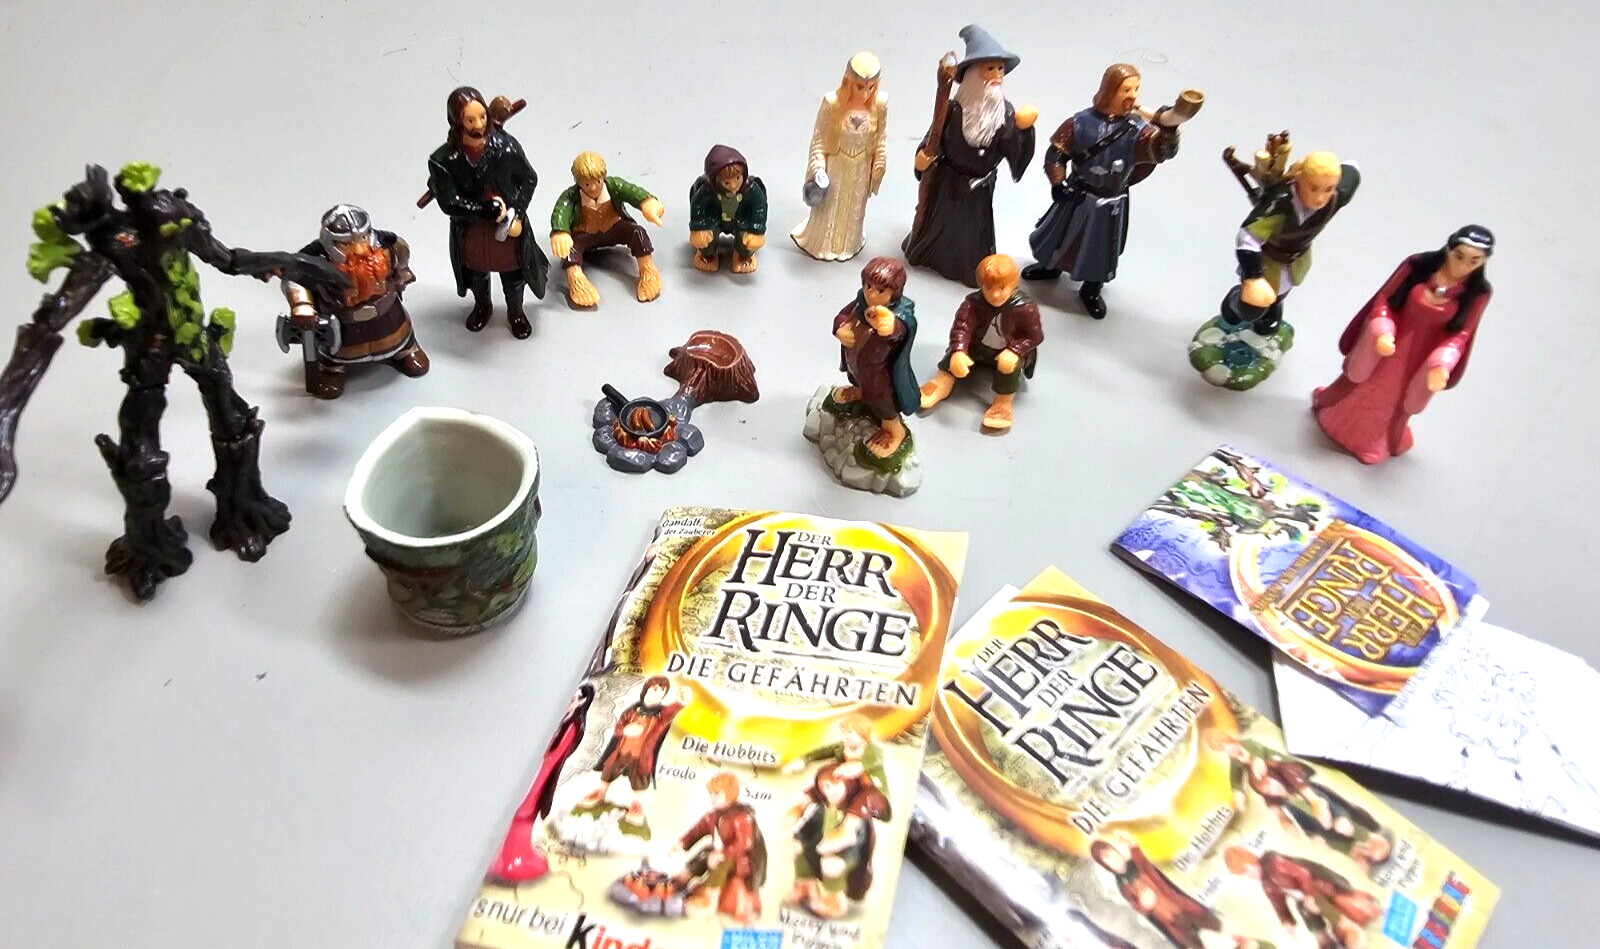 35PCS Lord of The Rings Kinder Figurines Collections, EXC Condtition